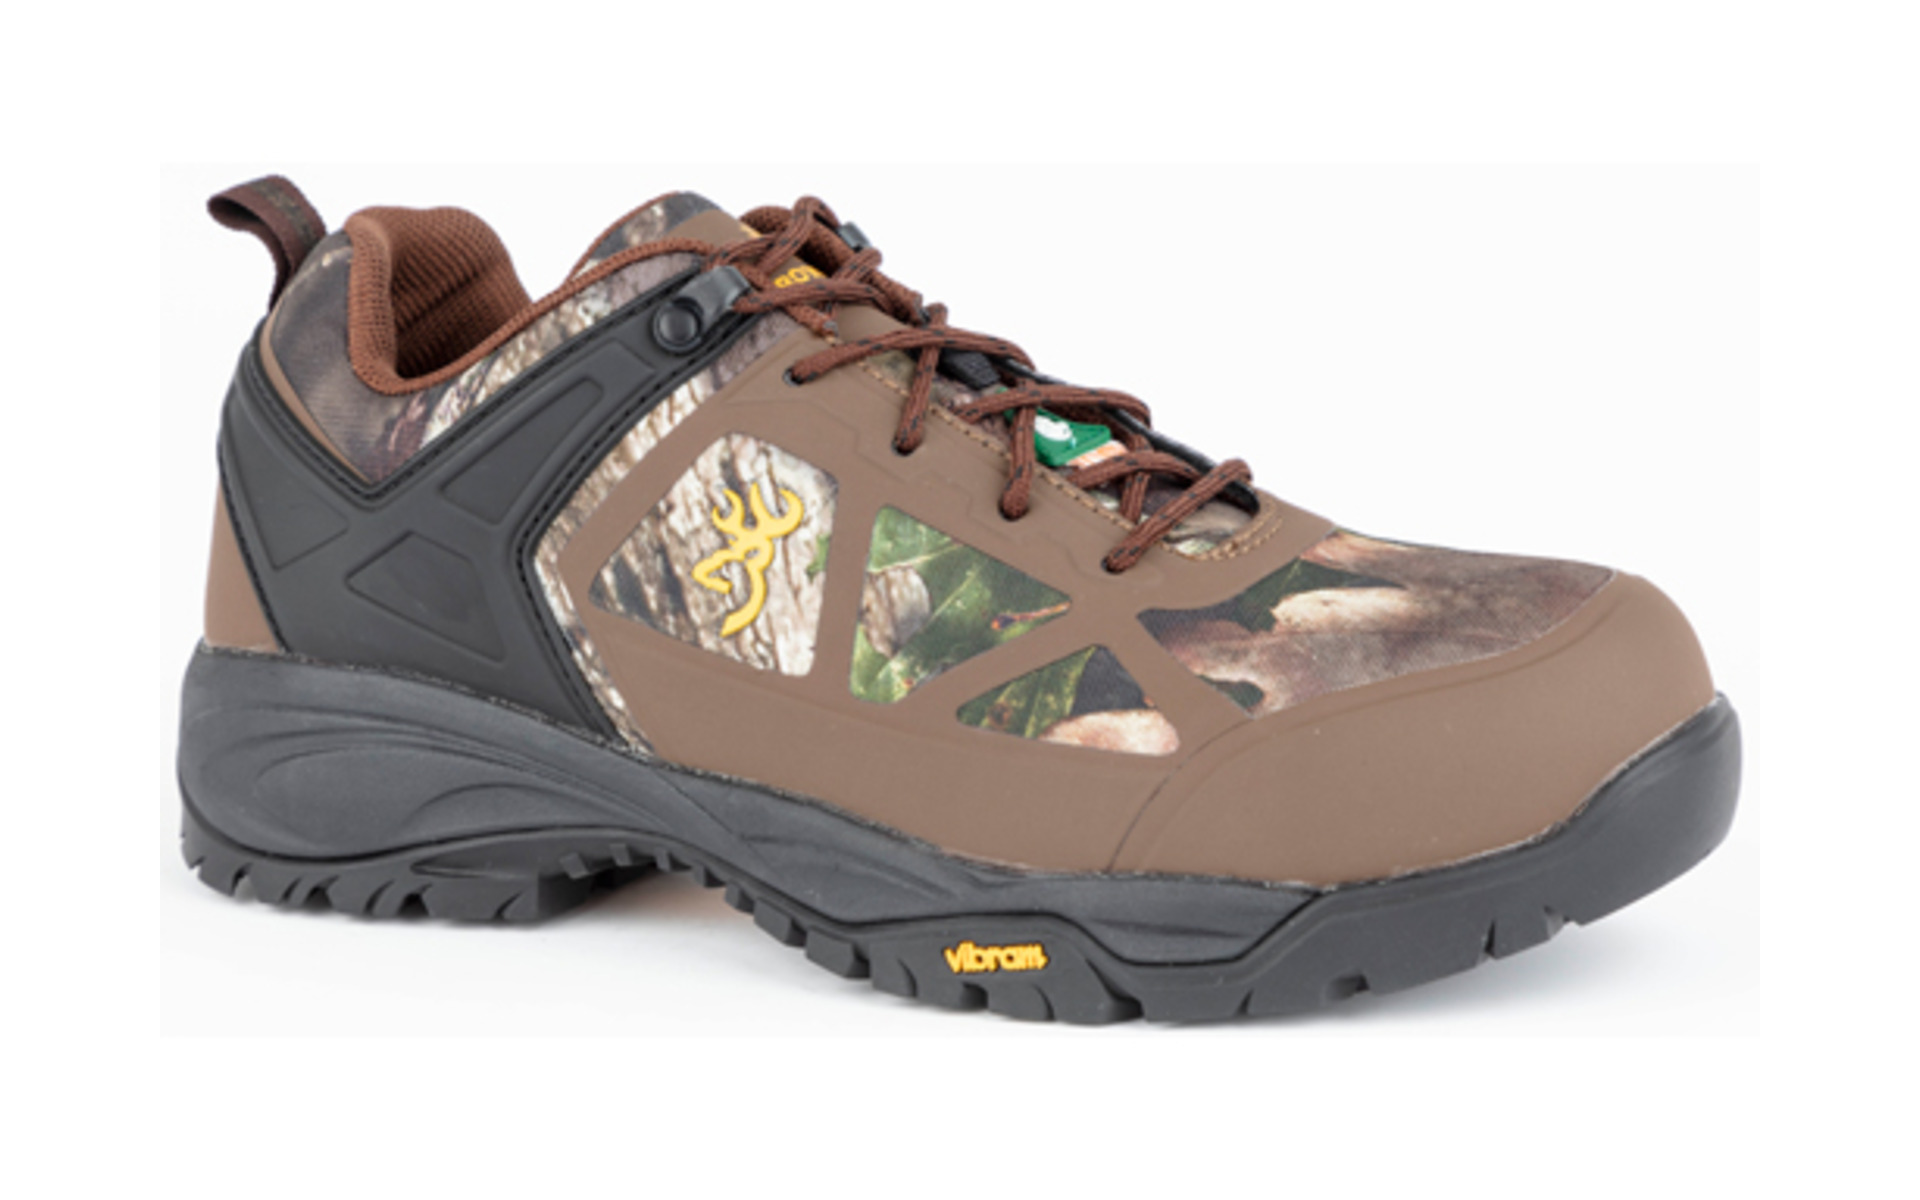 Men’s Browning Steadfast Safery Shoe with Vibram Sole